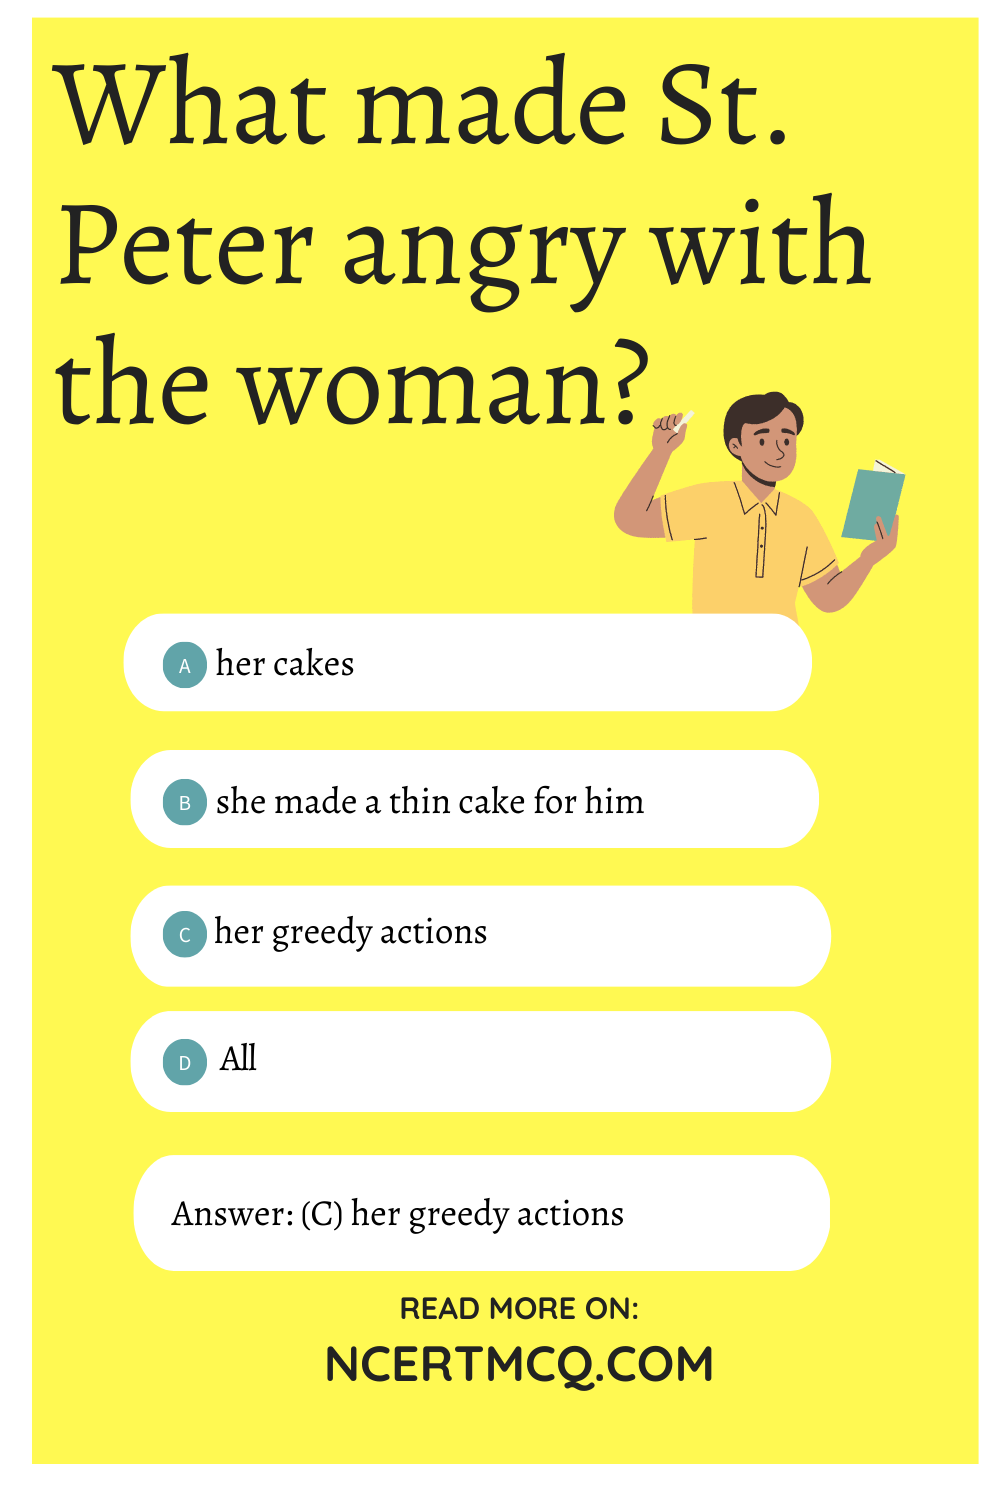 What made St. Peter angry with the woman?